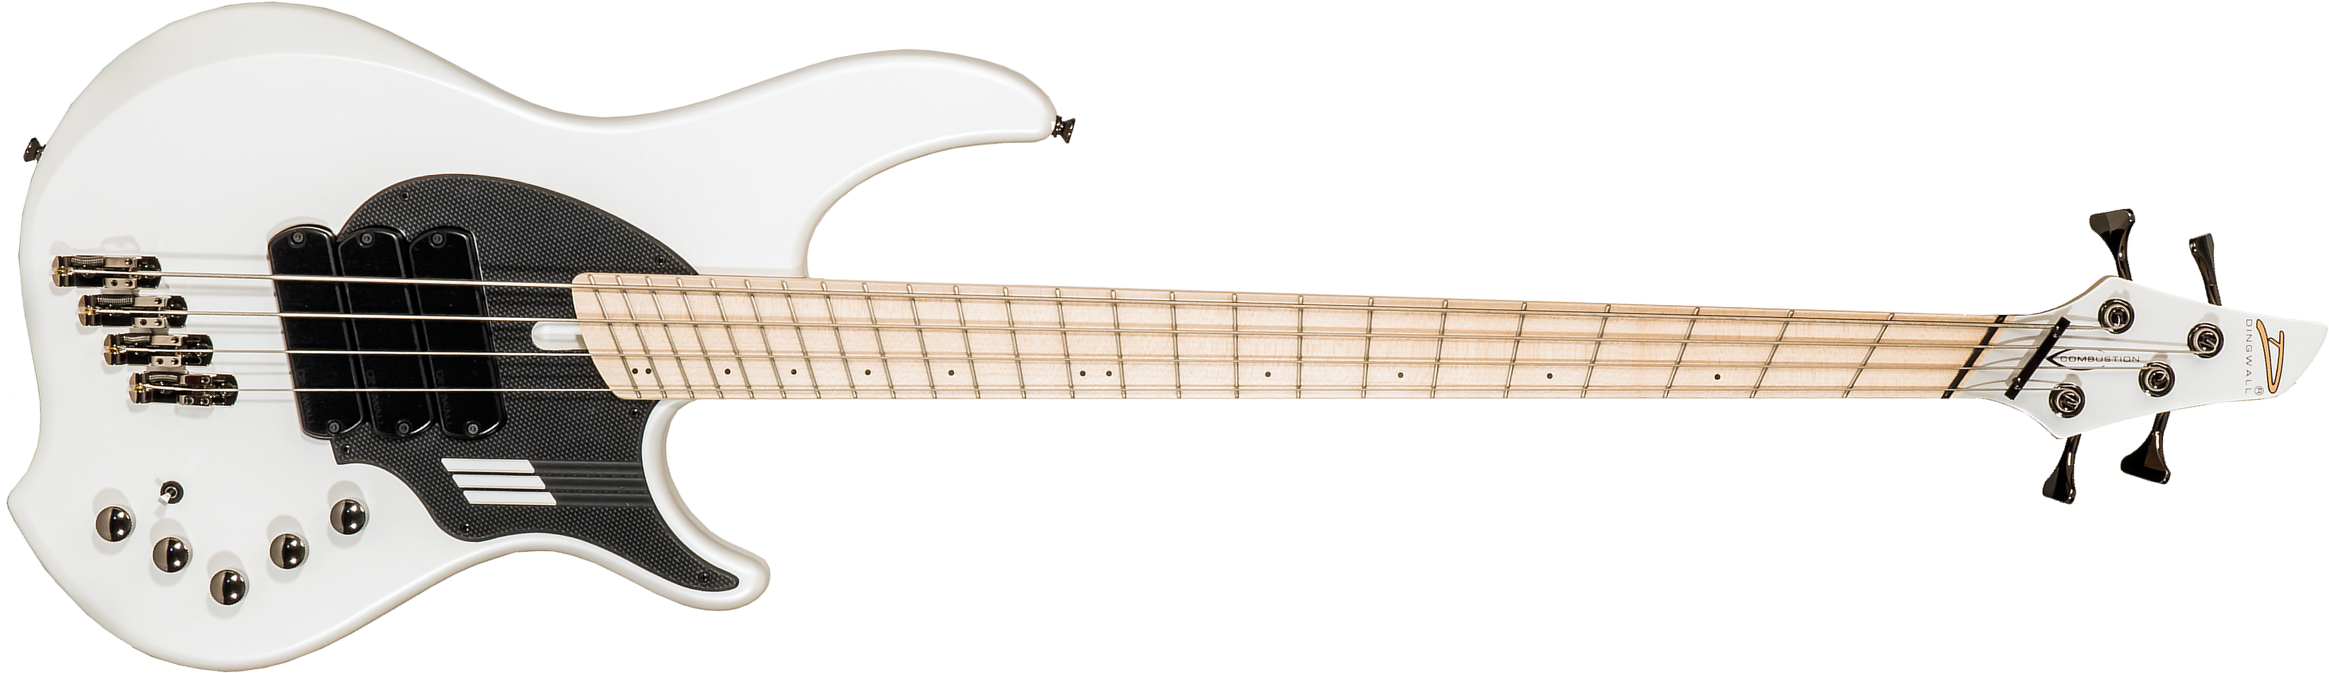 Dingwall Adam Nolly Getgood Ng3 4c 3pu Signature Active Mn - Ducati Pearl White - Solid body electric bass - Main picture